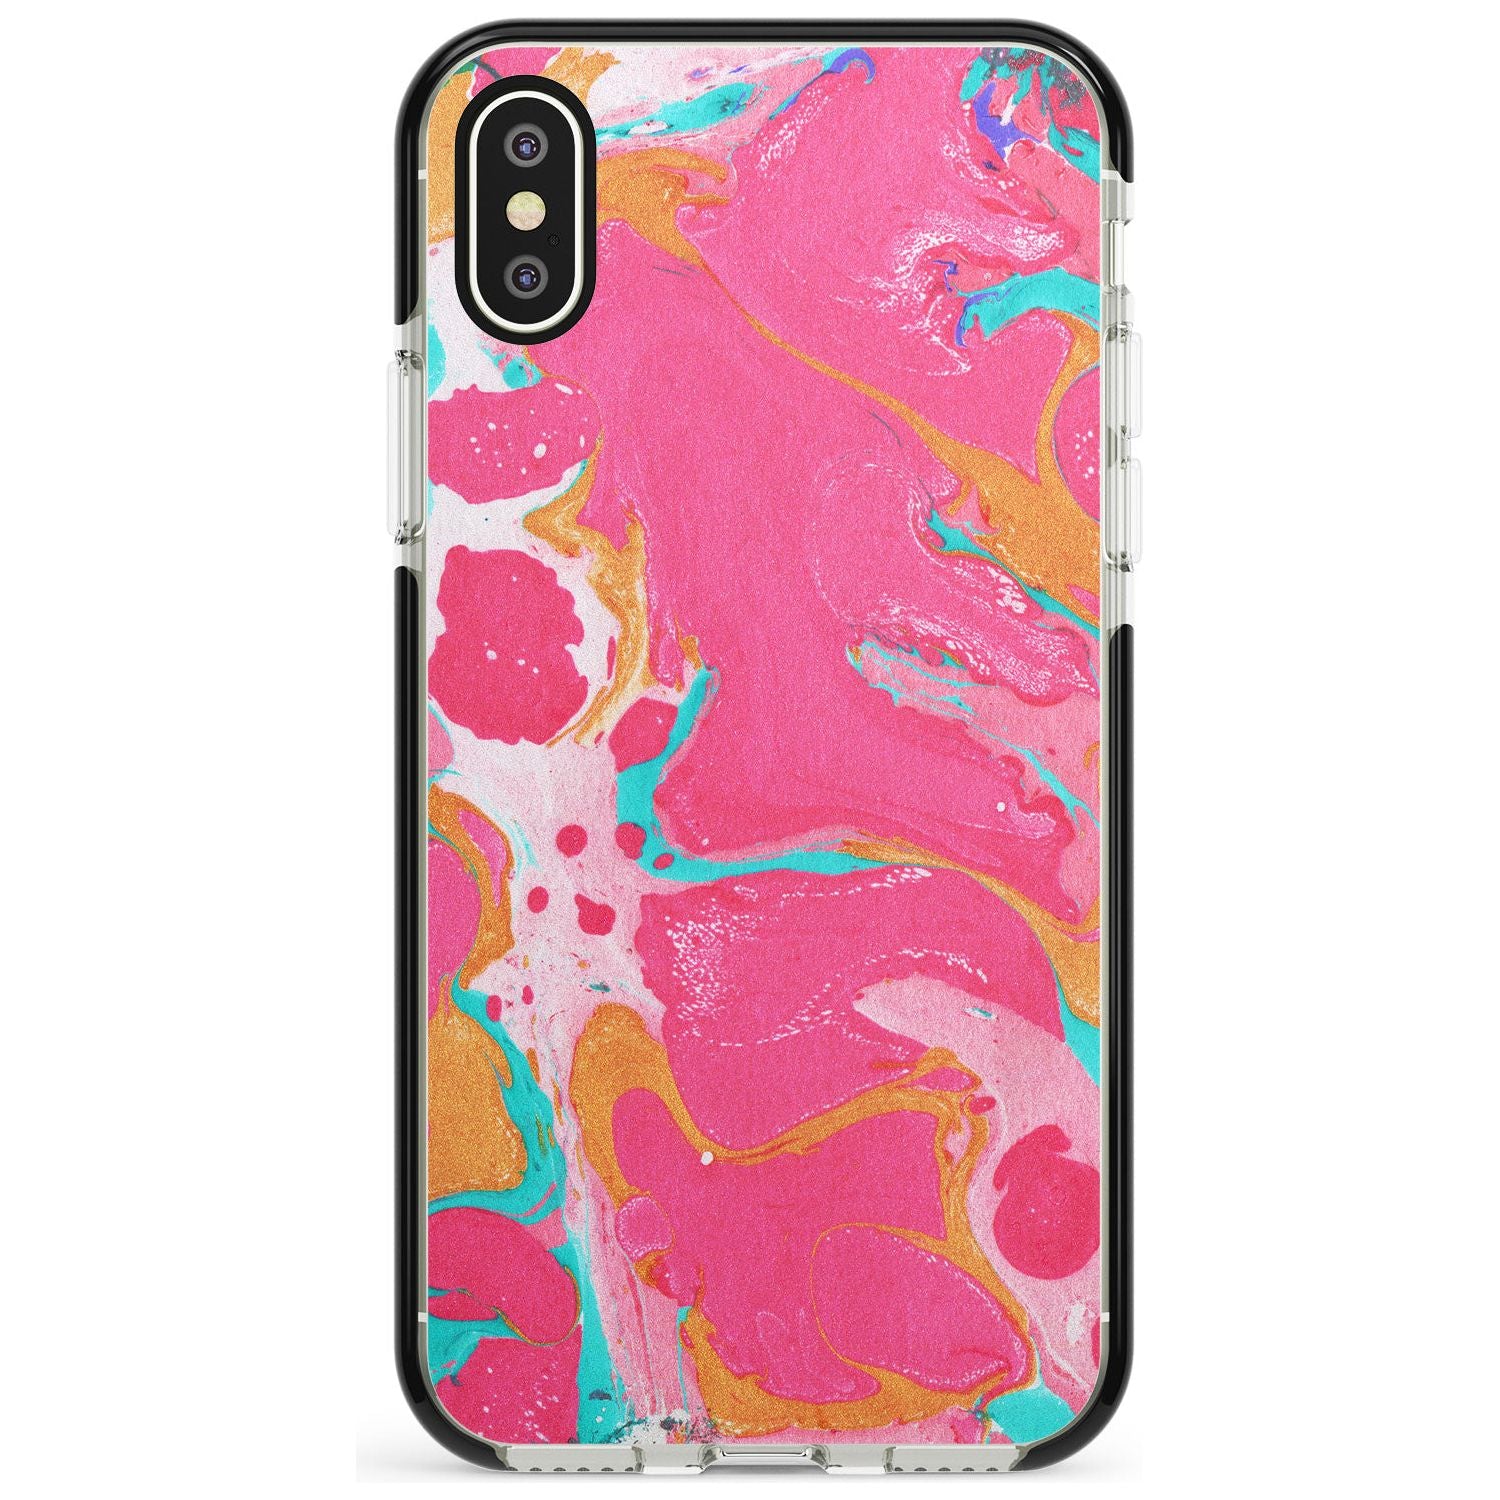 Pink, Orange & Turquoise Marbled Paper Pattern Black Impact Phone Case for iPhone X XS Max XR